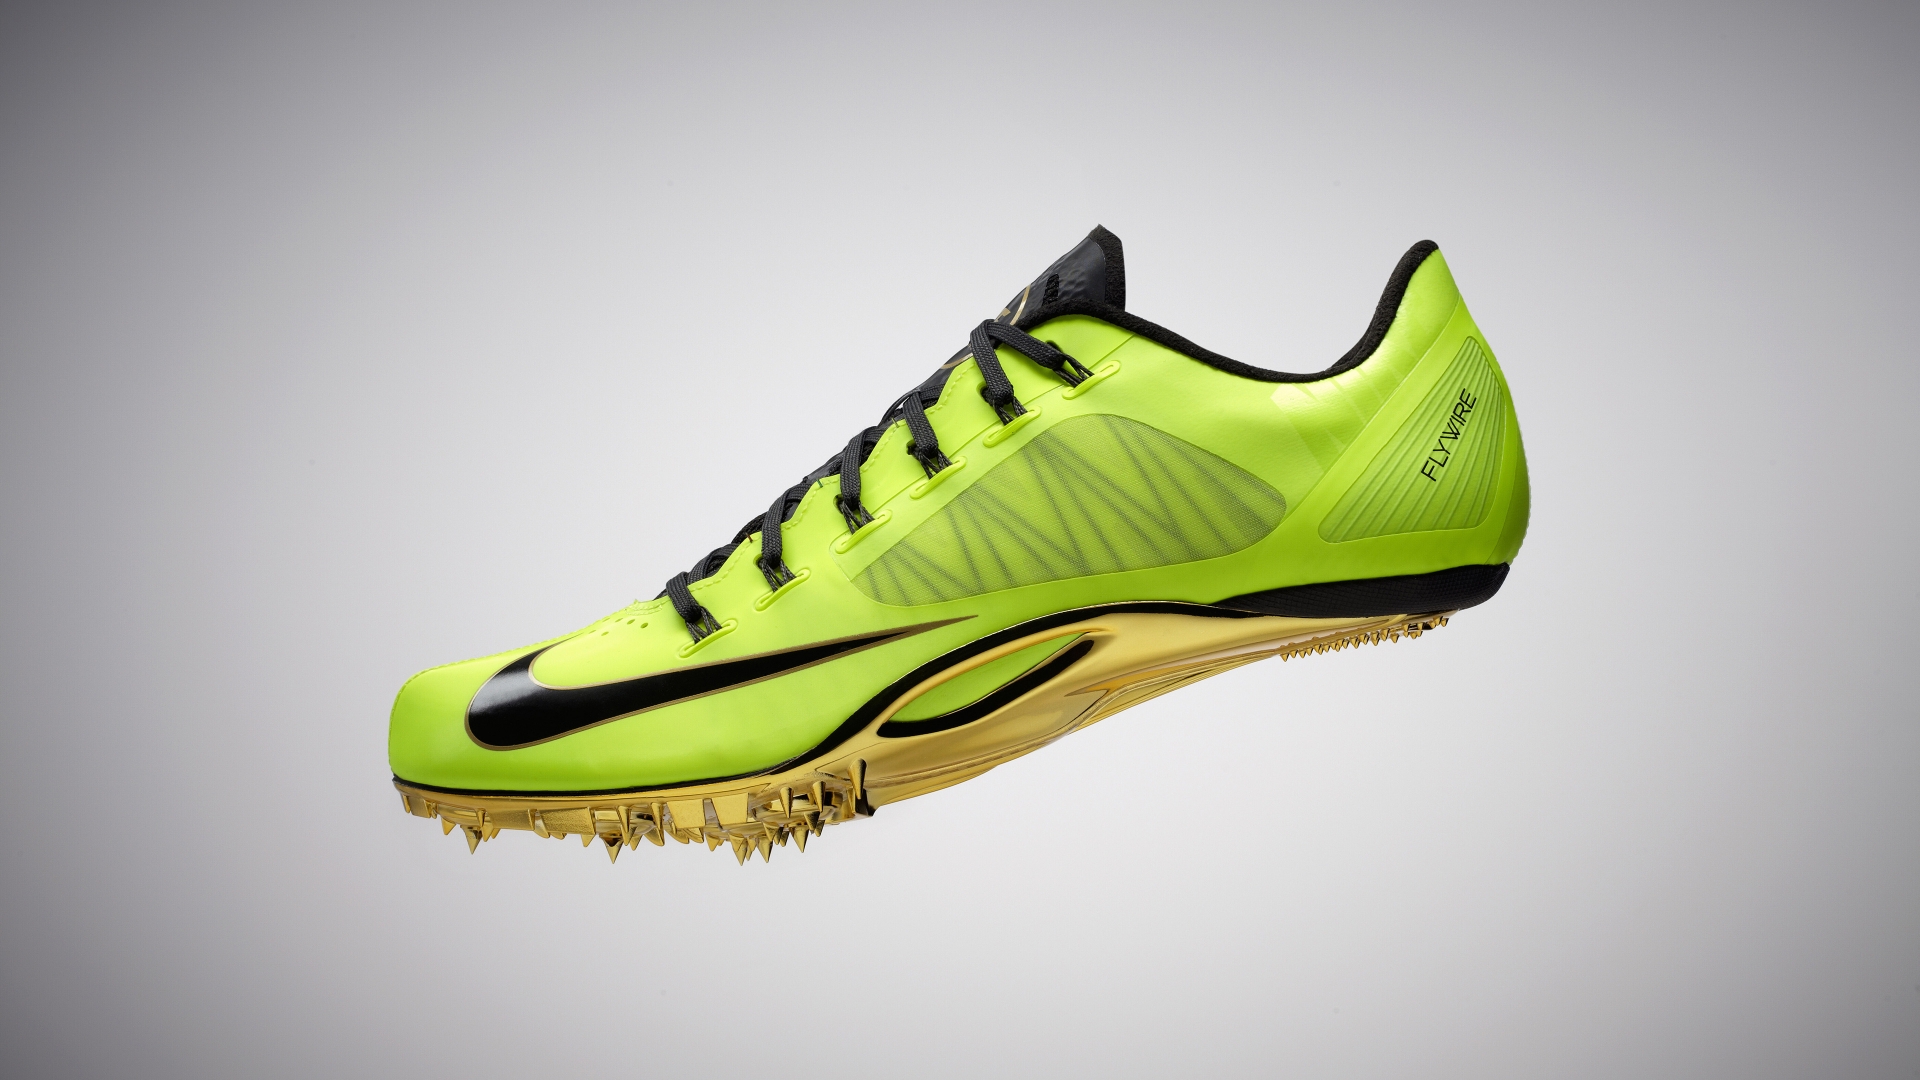 Nike Zoom Superfly R4 for 1920 x 1080 HDTV 1080p resolution